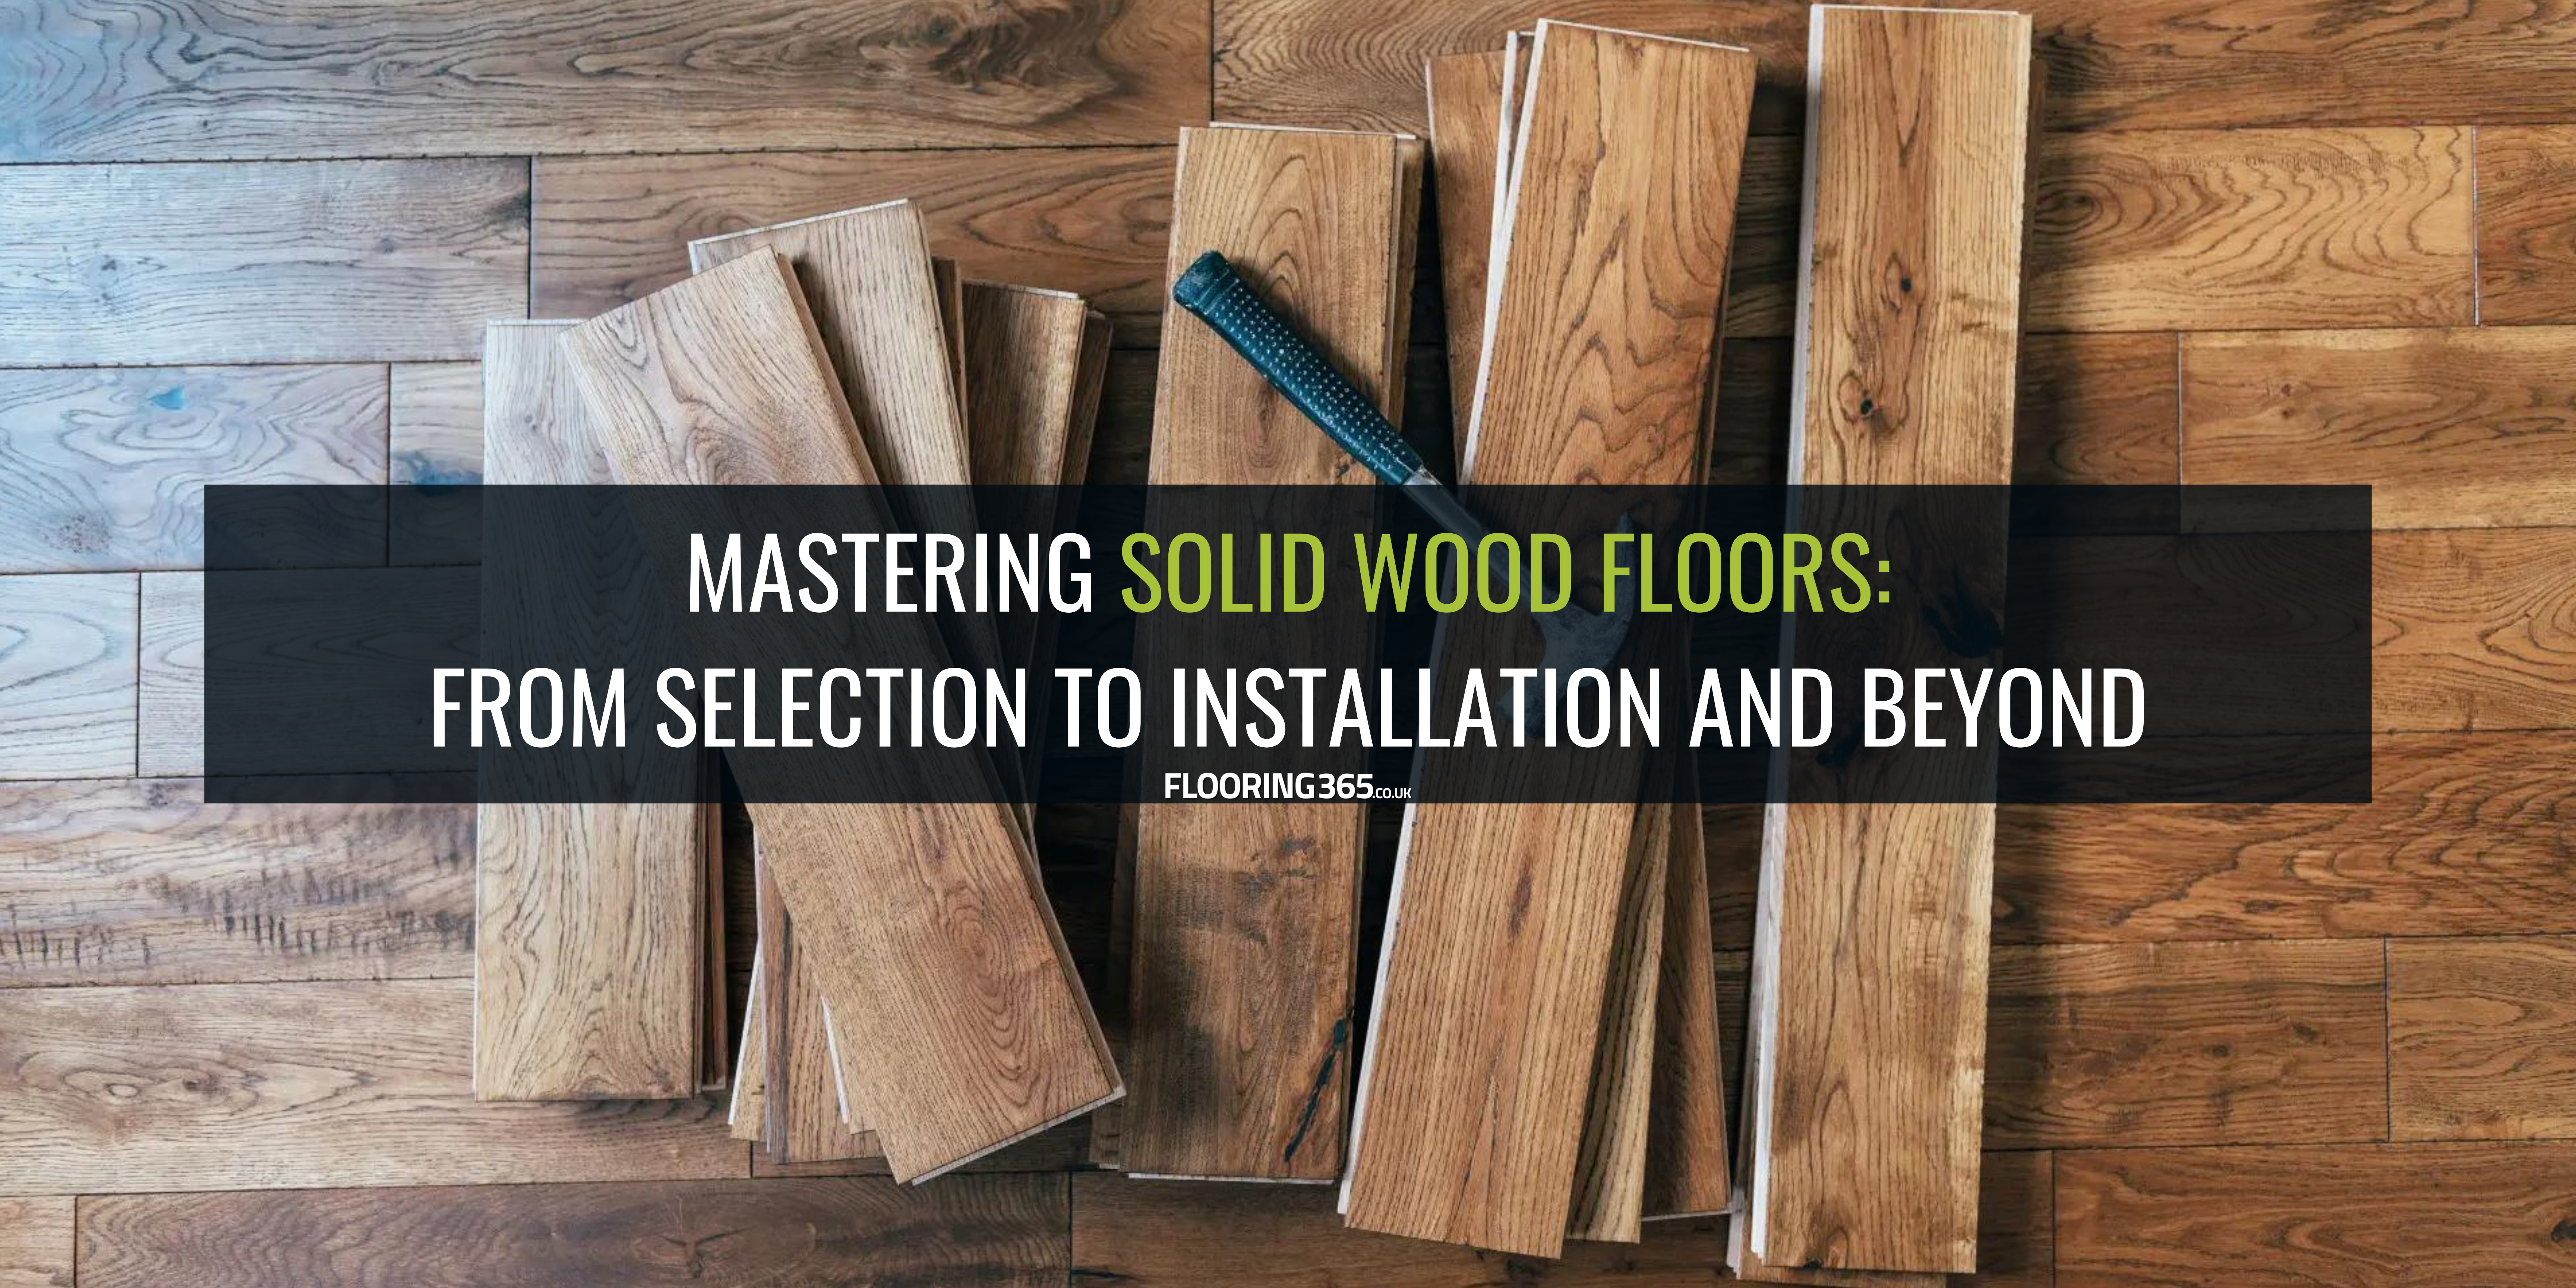 Mastering Solid Wood Floors: From Selection to Installation and Beyond